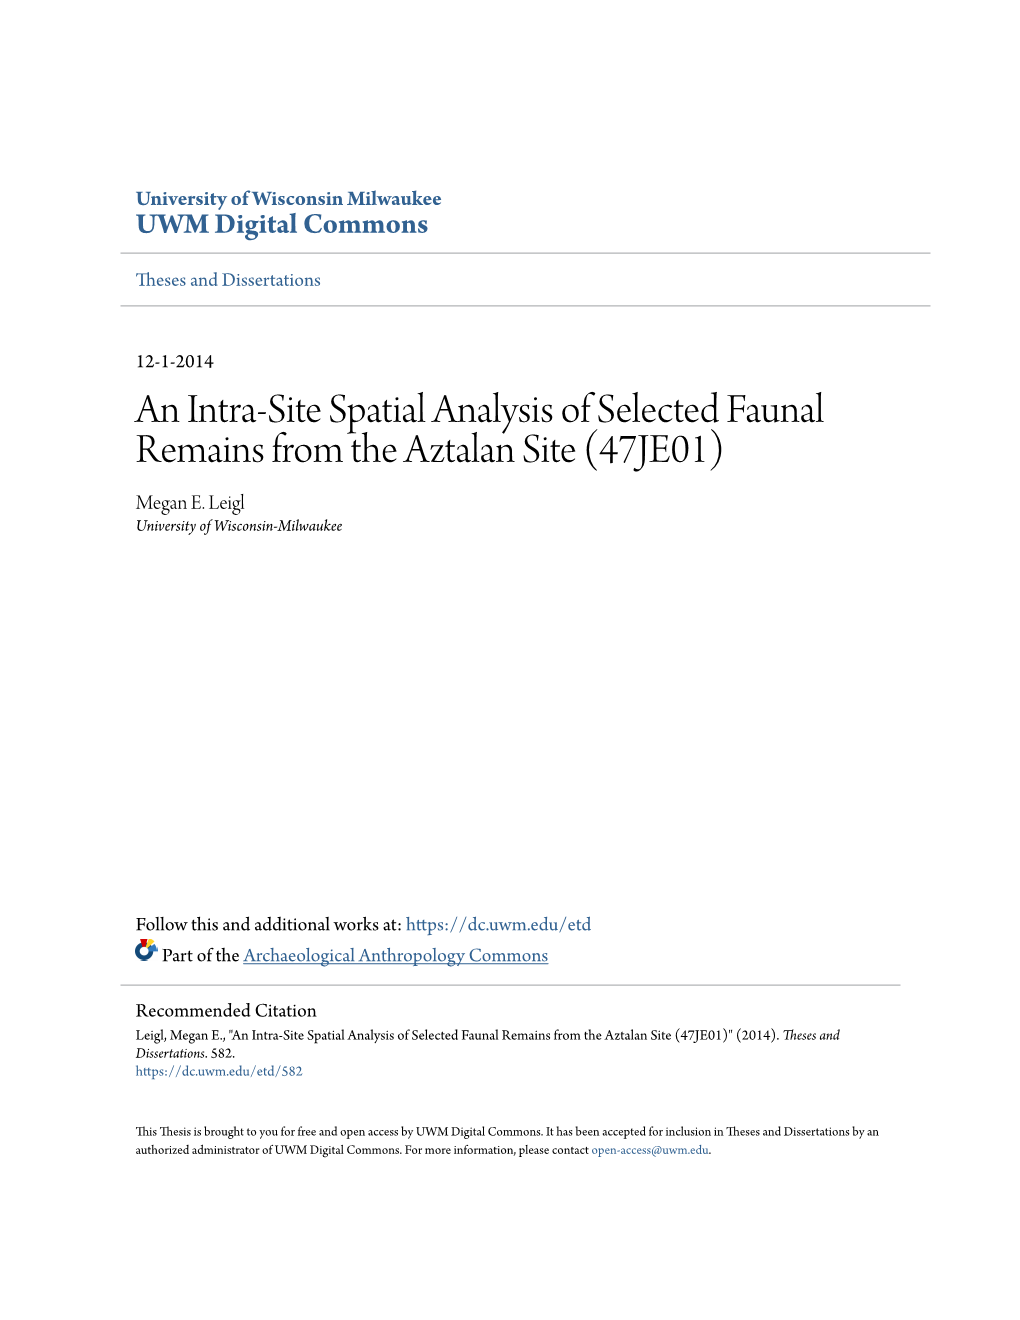 An Intra-Site Spatial Analysis of Selected Faunal Remains from the Aztalan Site (47JE01) Megan E